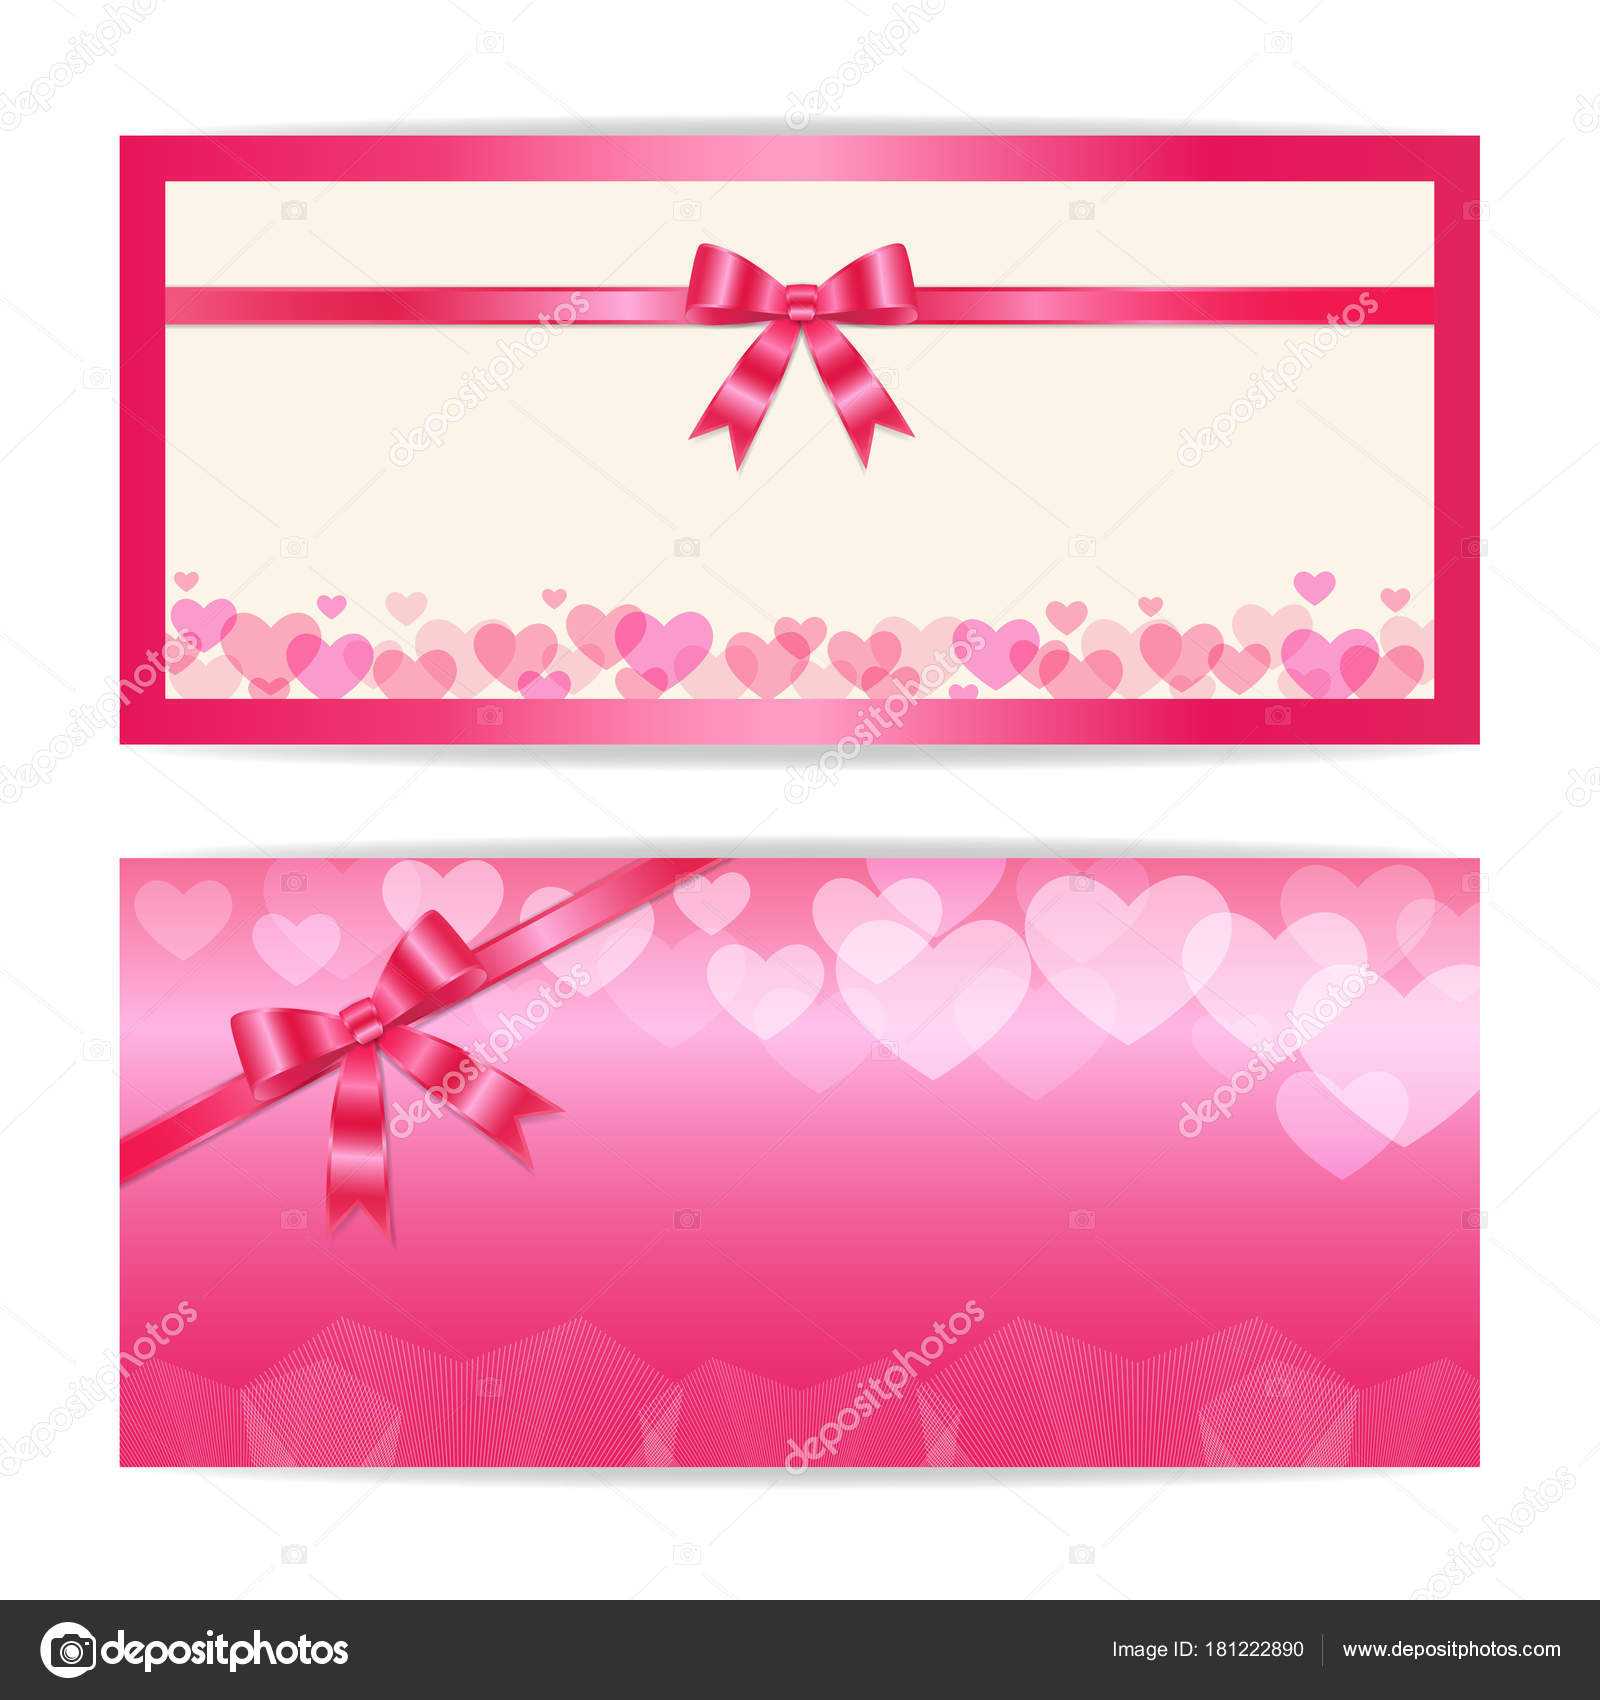 Love And Sweet Theme Gift Certificate, Voucher, Gift Card Or In Love Certificate Templates